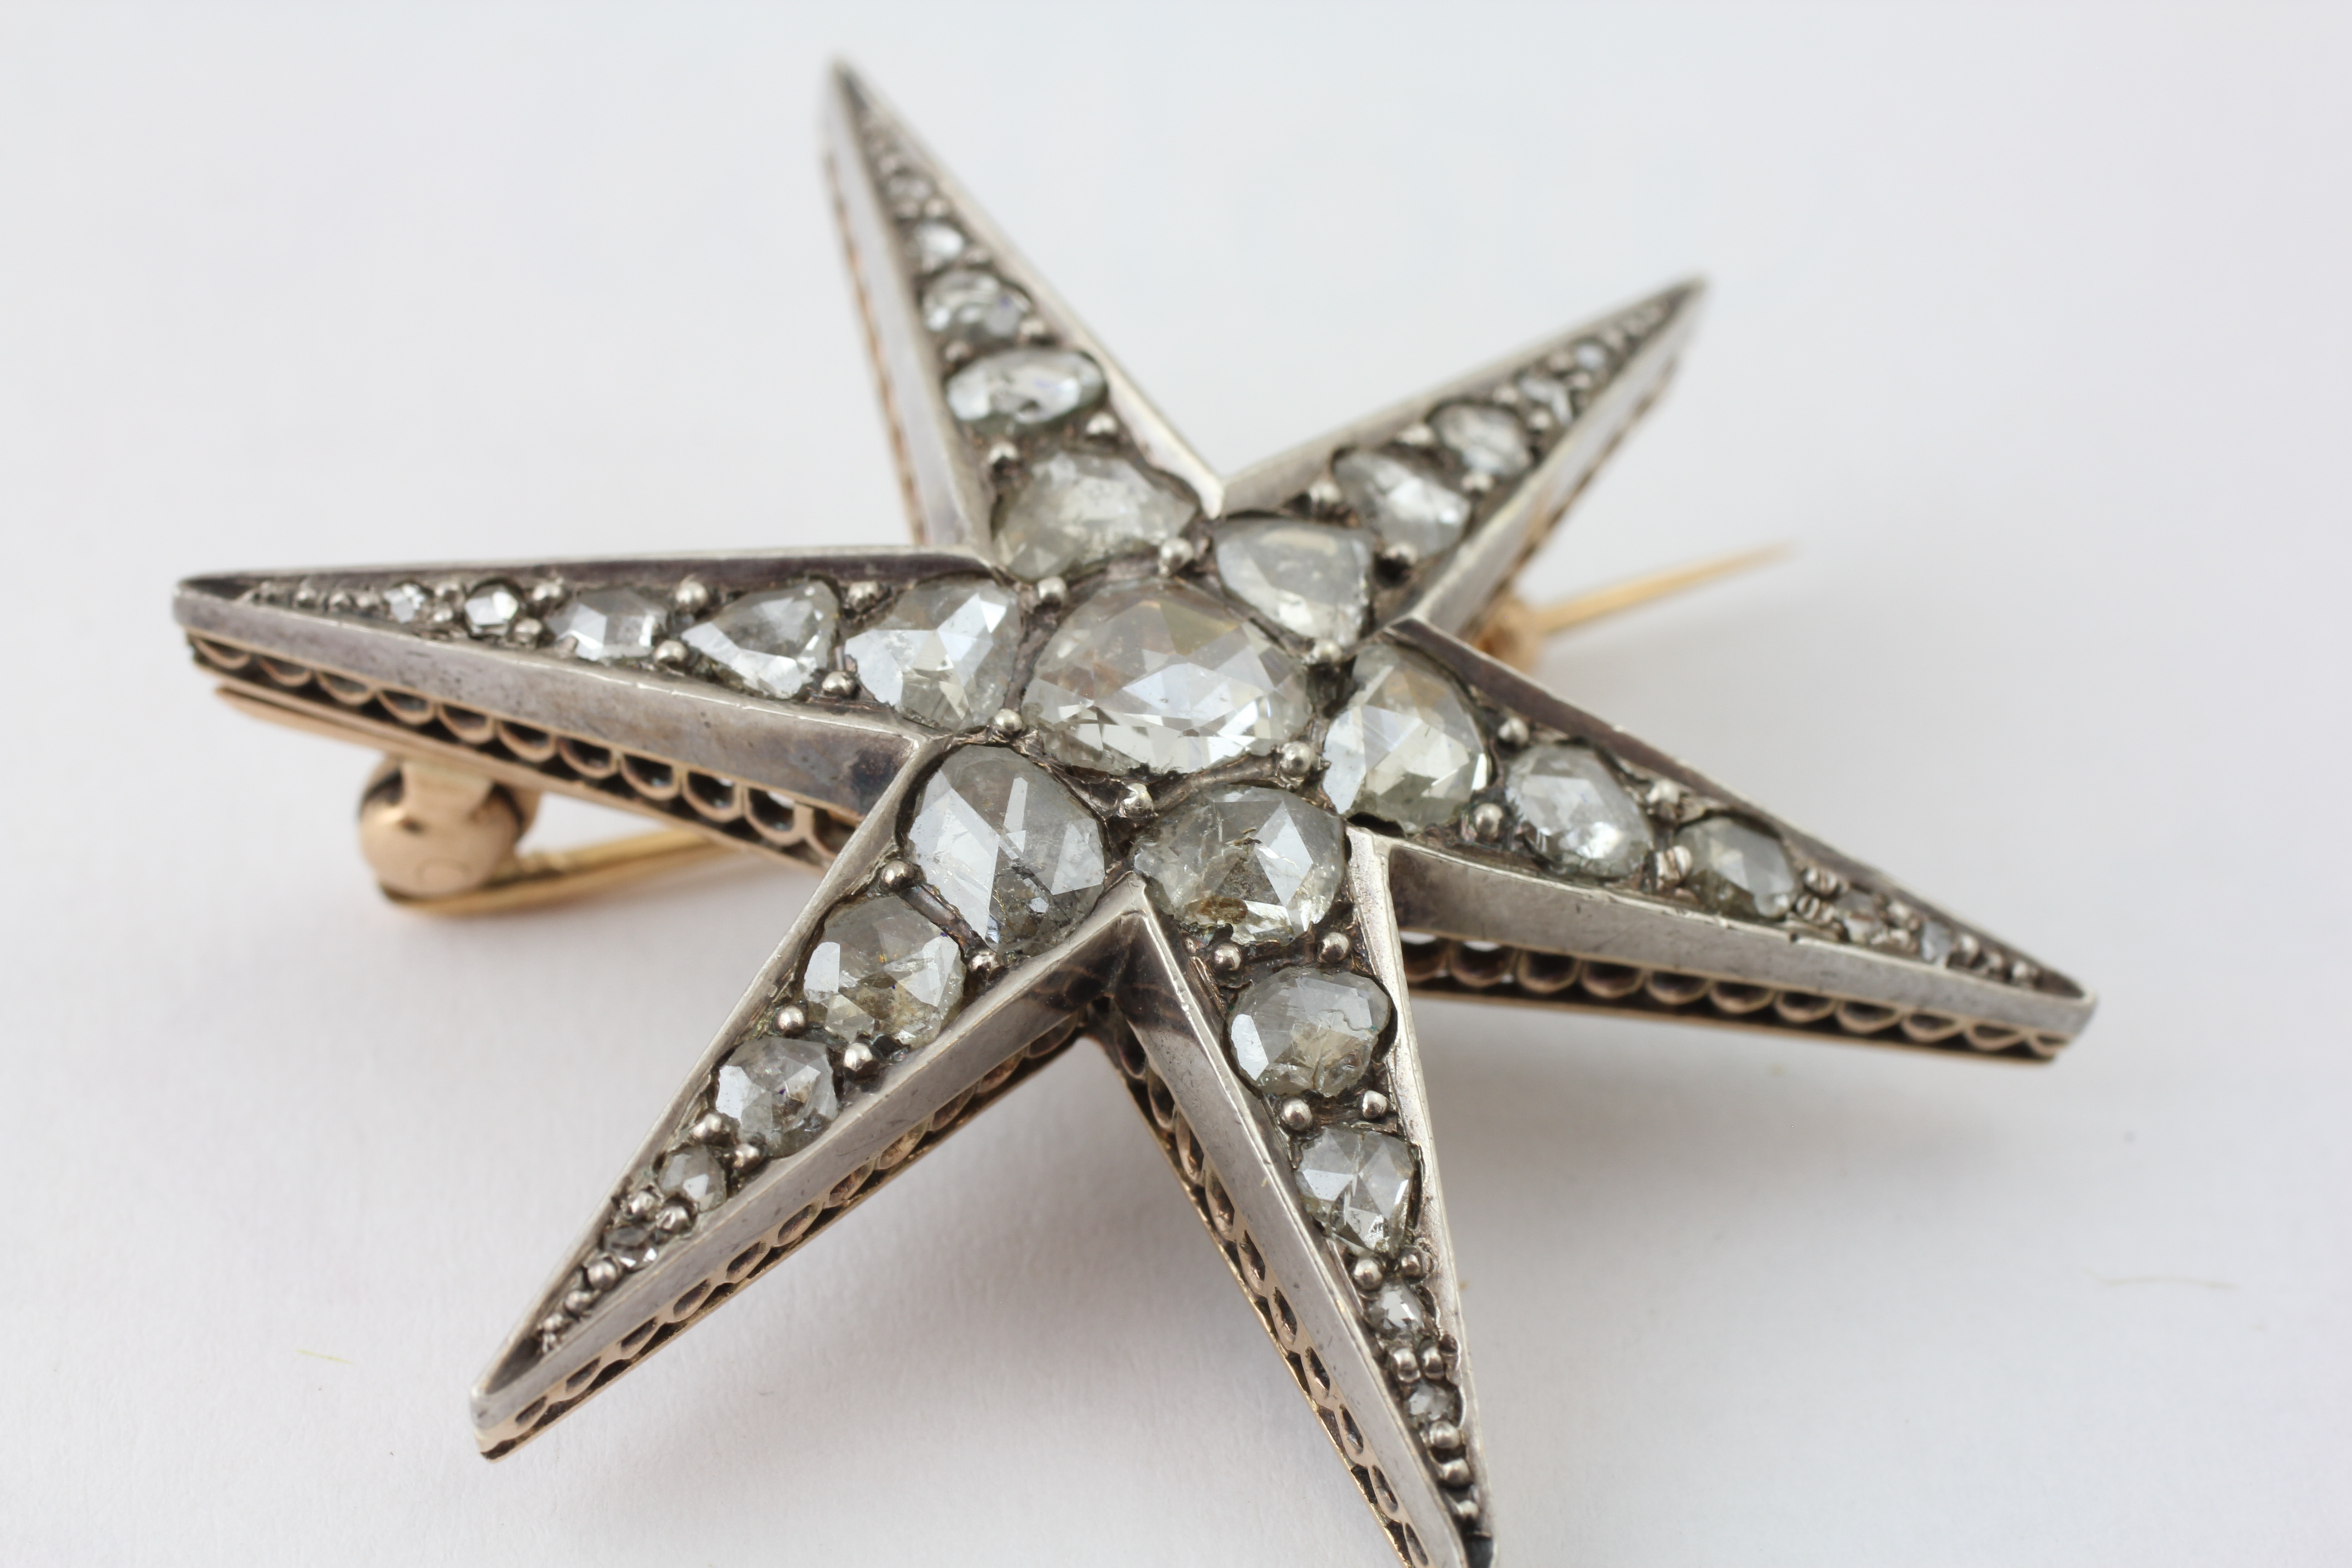 A DIAMOND BROOCH OF SIX-POINTED STAR DESIGN AND SET WITH 31 OLD CUT DIAMONDS, DIAMETER APPROX. - Image 2 of 6